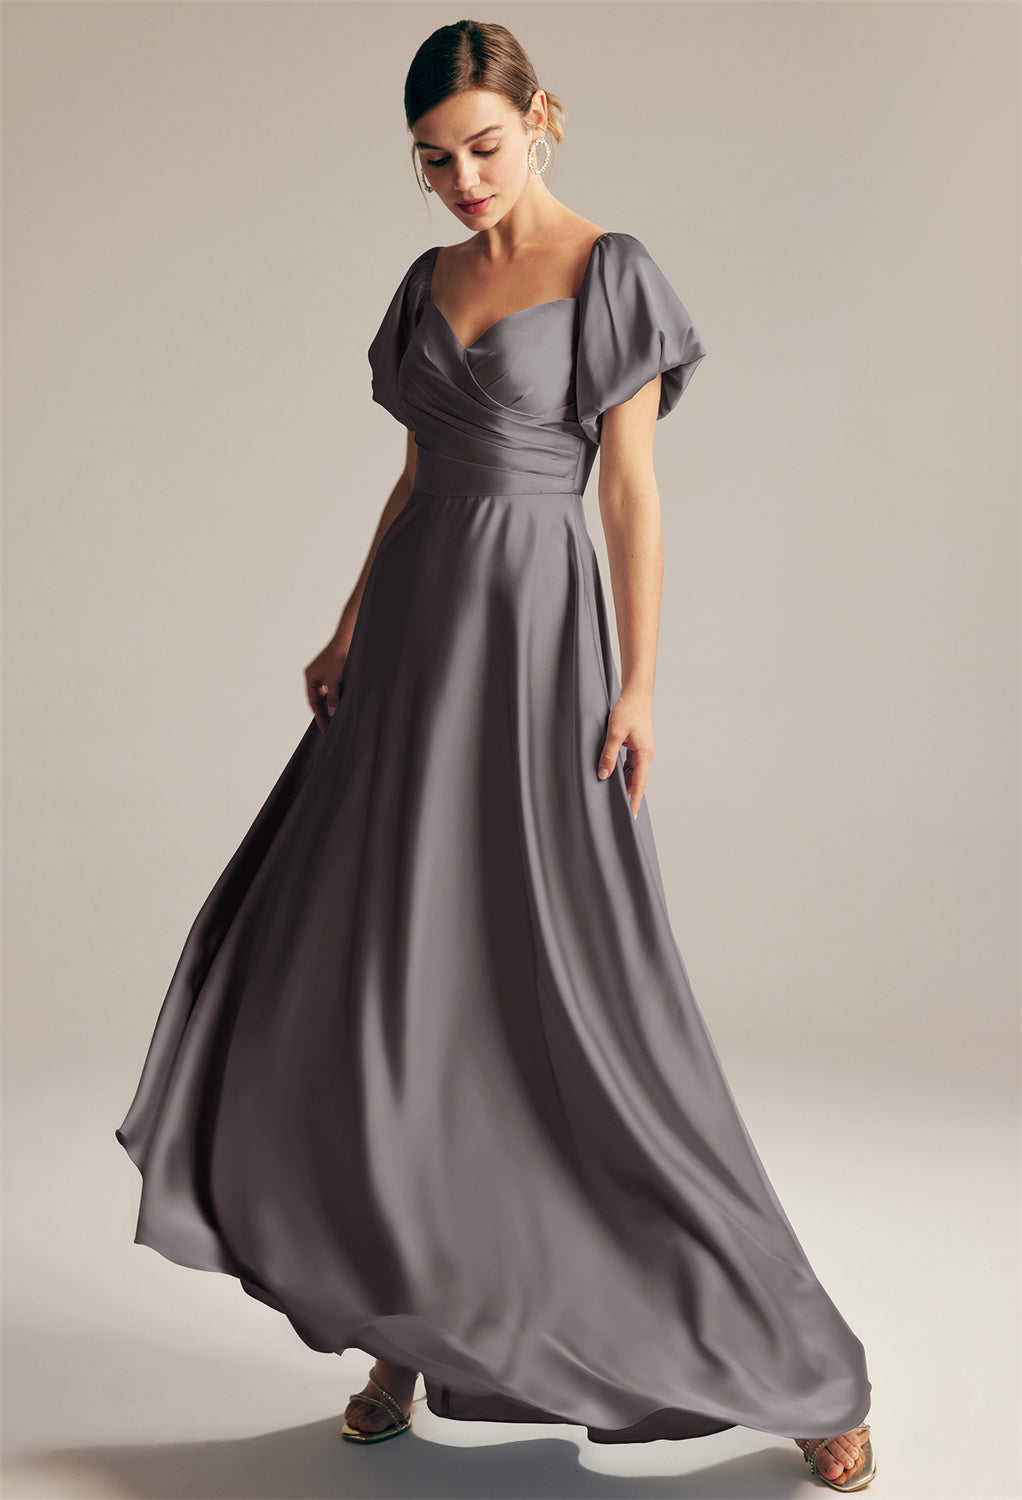 The bridesmaid is wearing a Dey - Satin Charmeuse Bridesmaid Dress - Off The Rack by Bergamot Bridal.